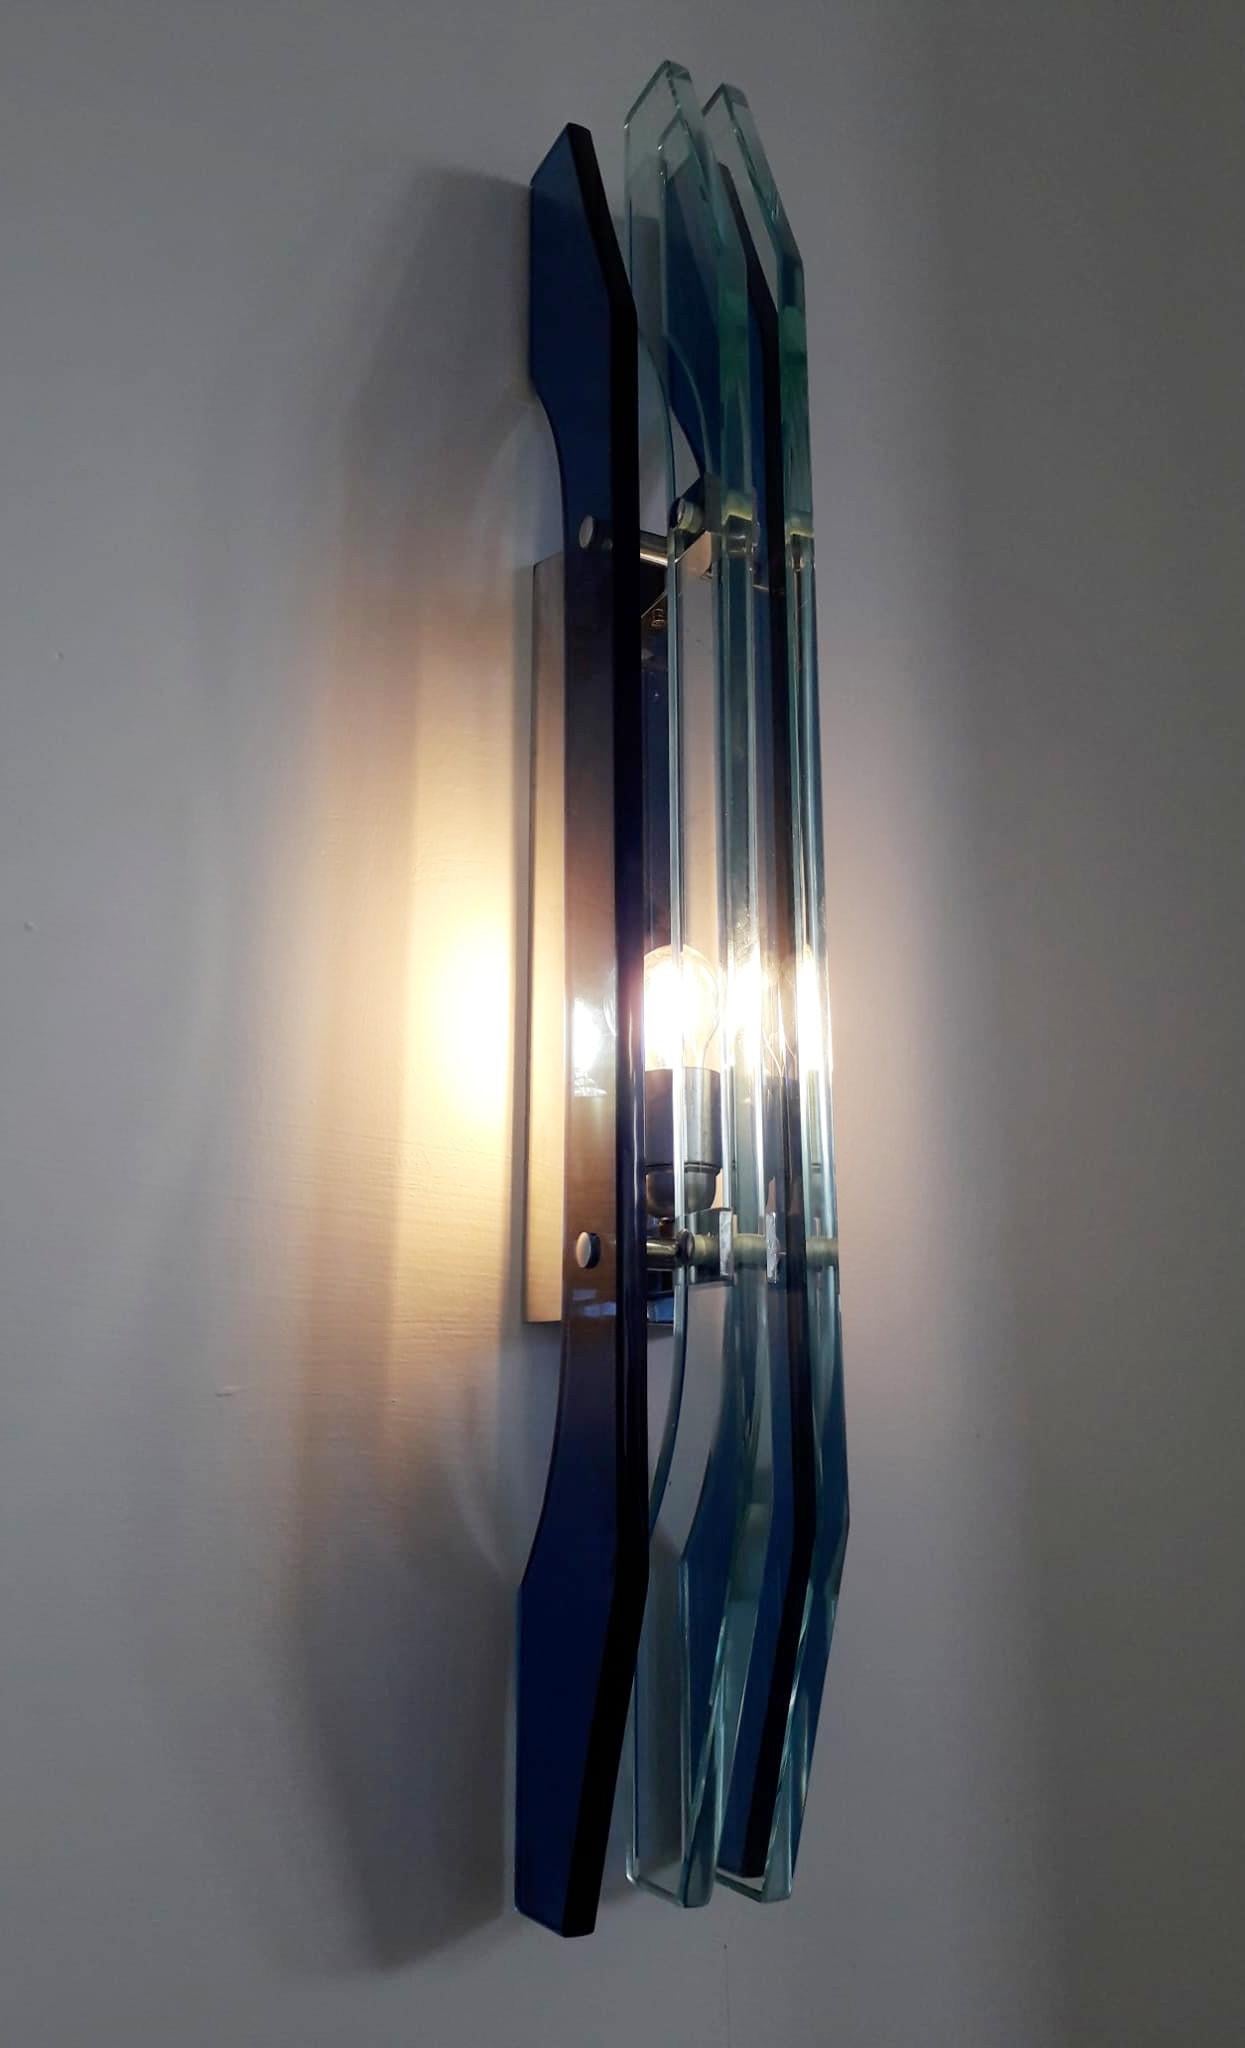 Mid-Century Modern Rare Pair of Large Beveled Sconces by Veca - 2 Pairs Available For Sale